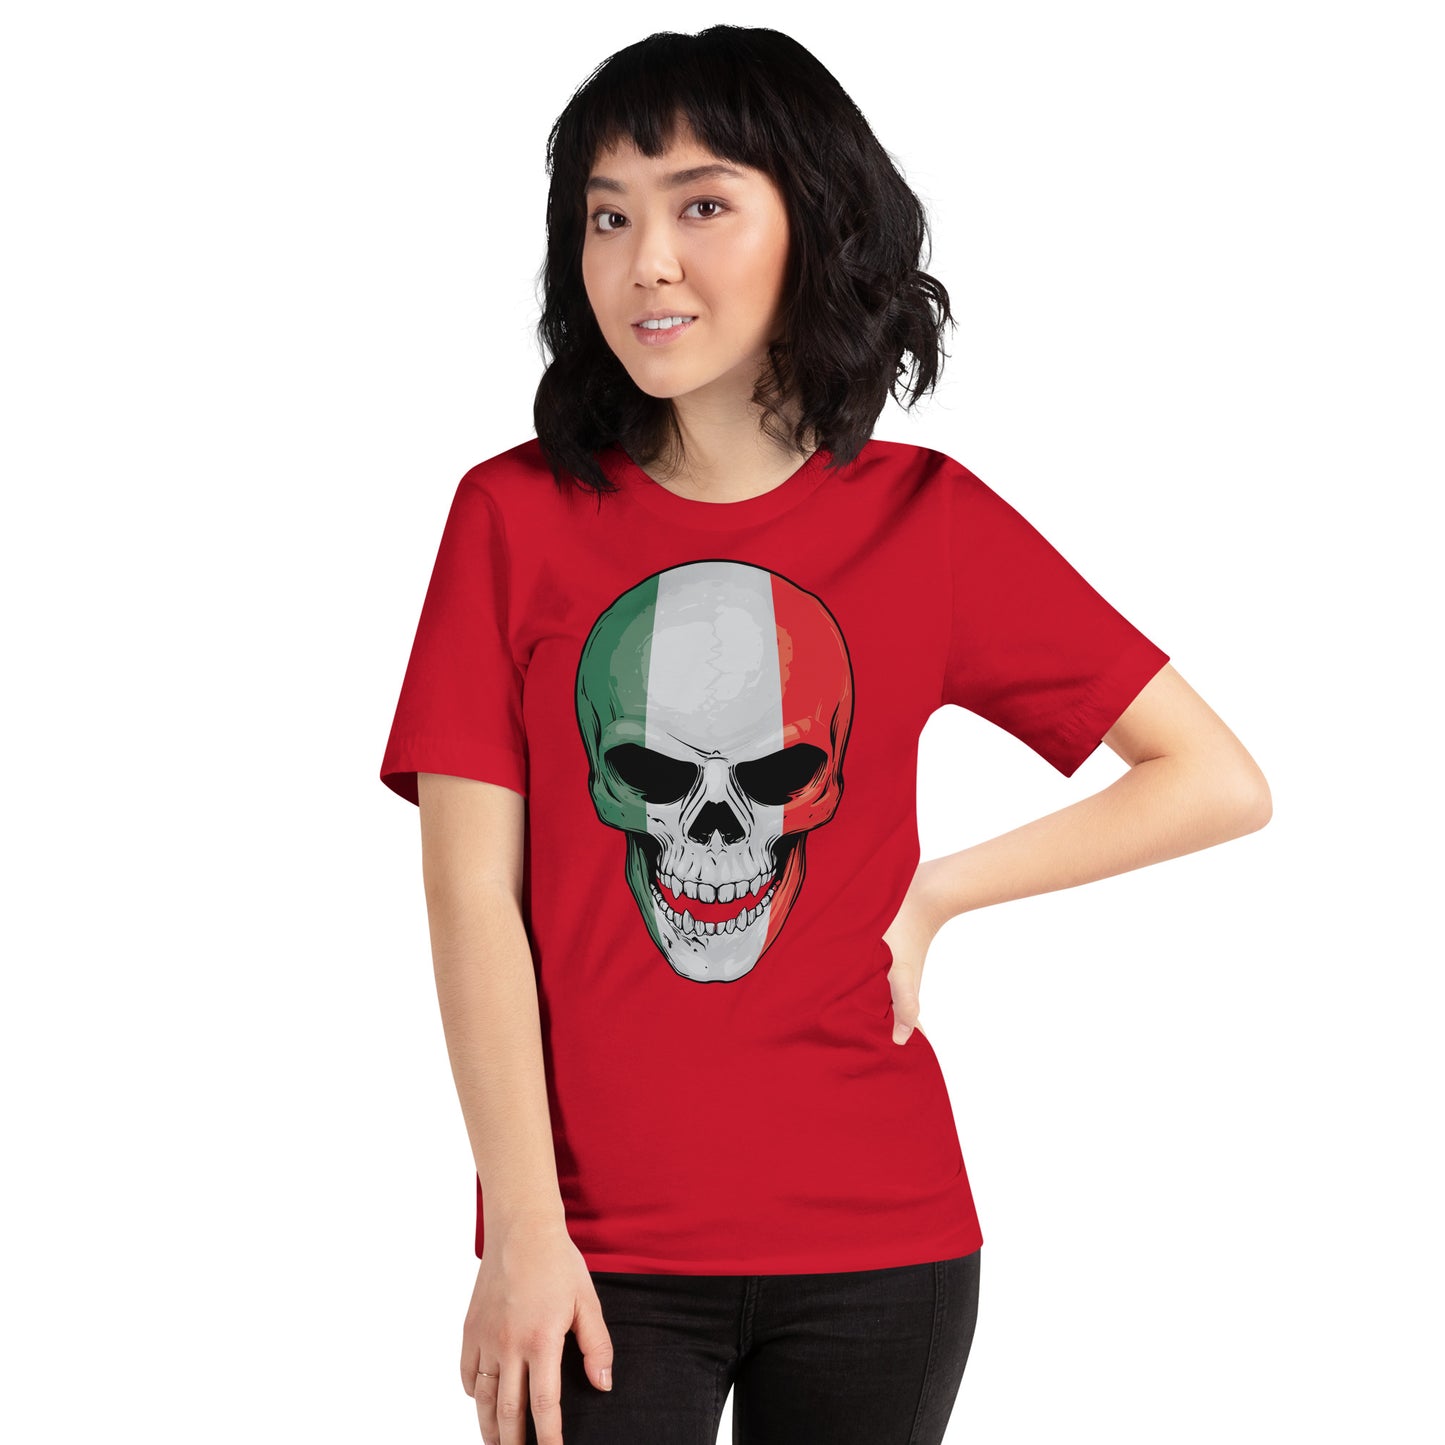 Italian T-shirt with Italy Skull For Women And Men